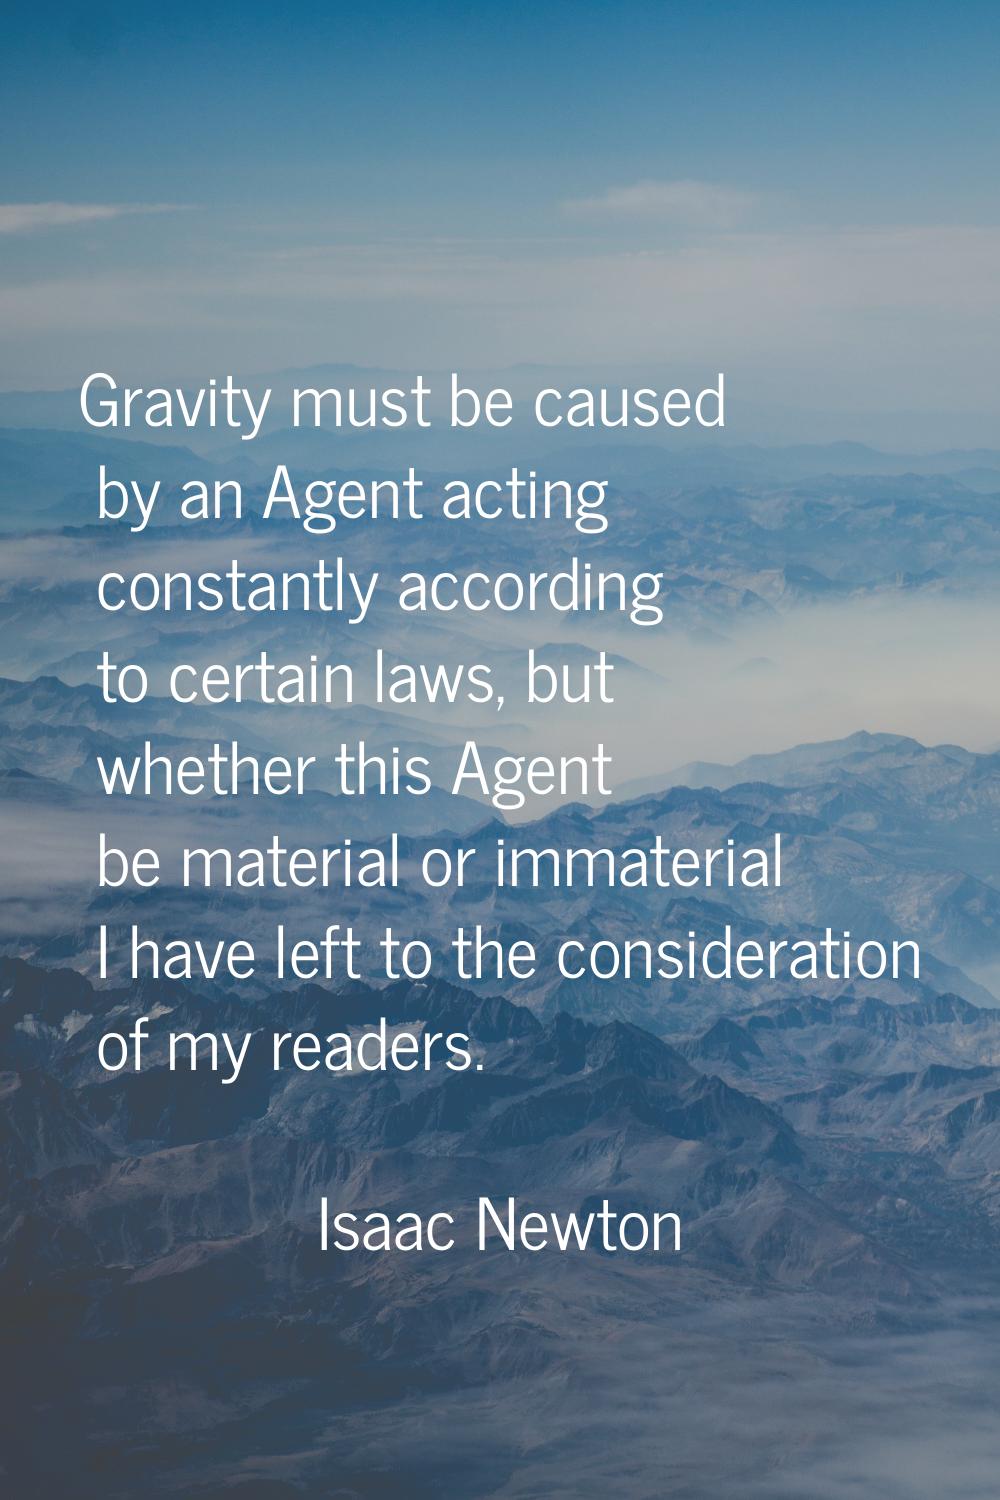 Gravity must be caused by an Agent acting constantly according to certain laws, but whether this Ag